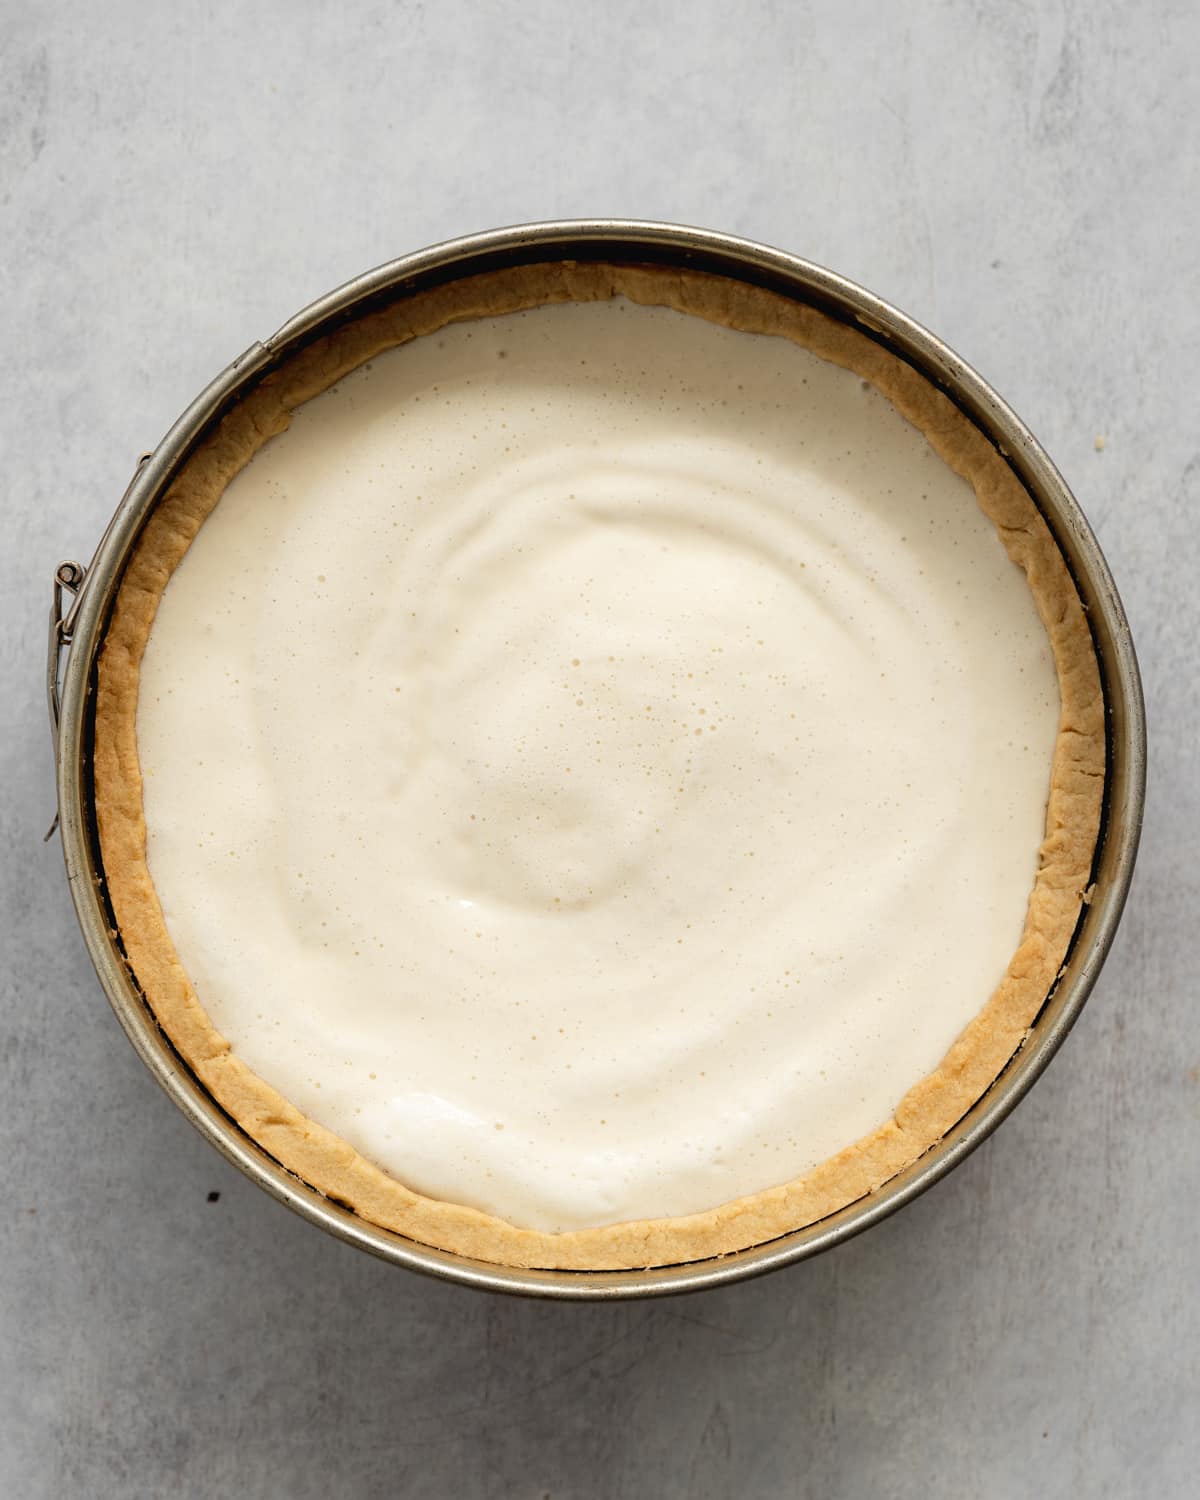 cheesecake in a pan before baking.